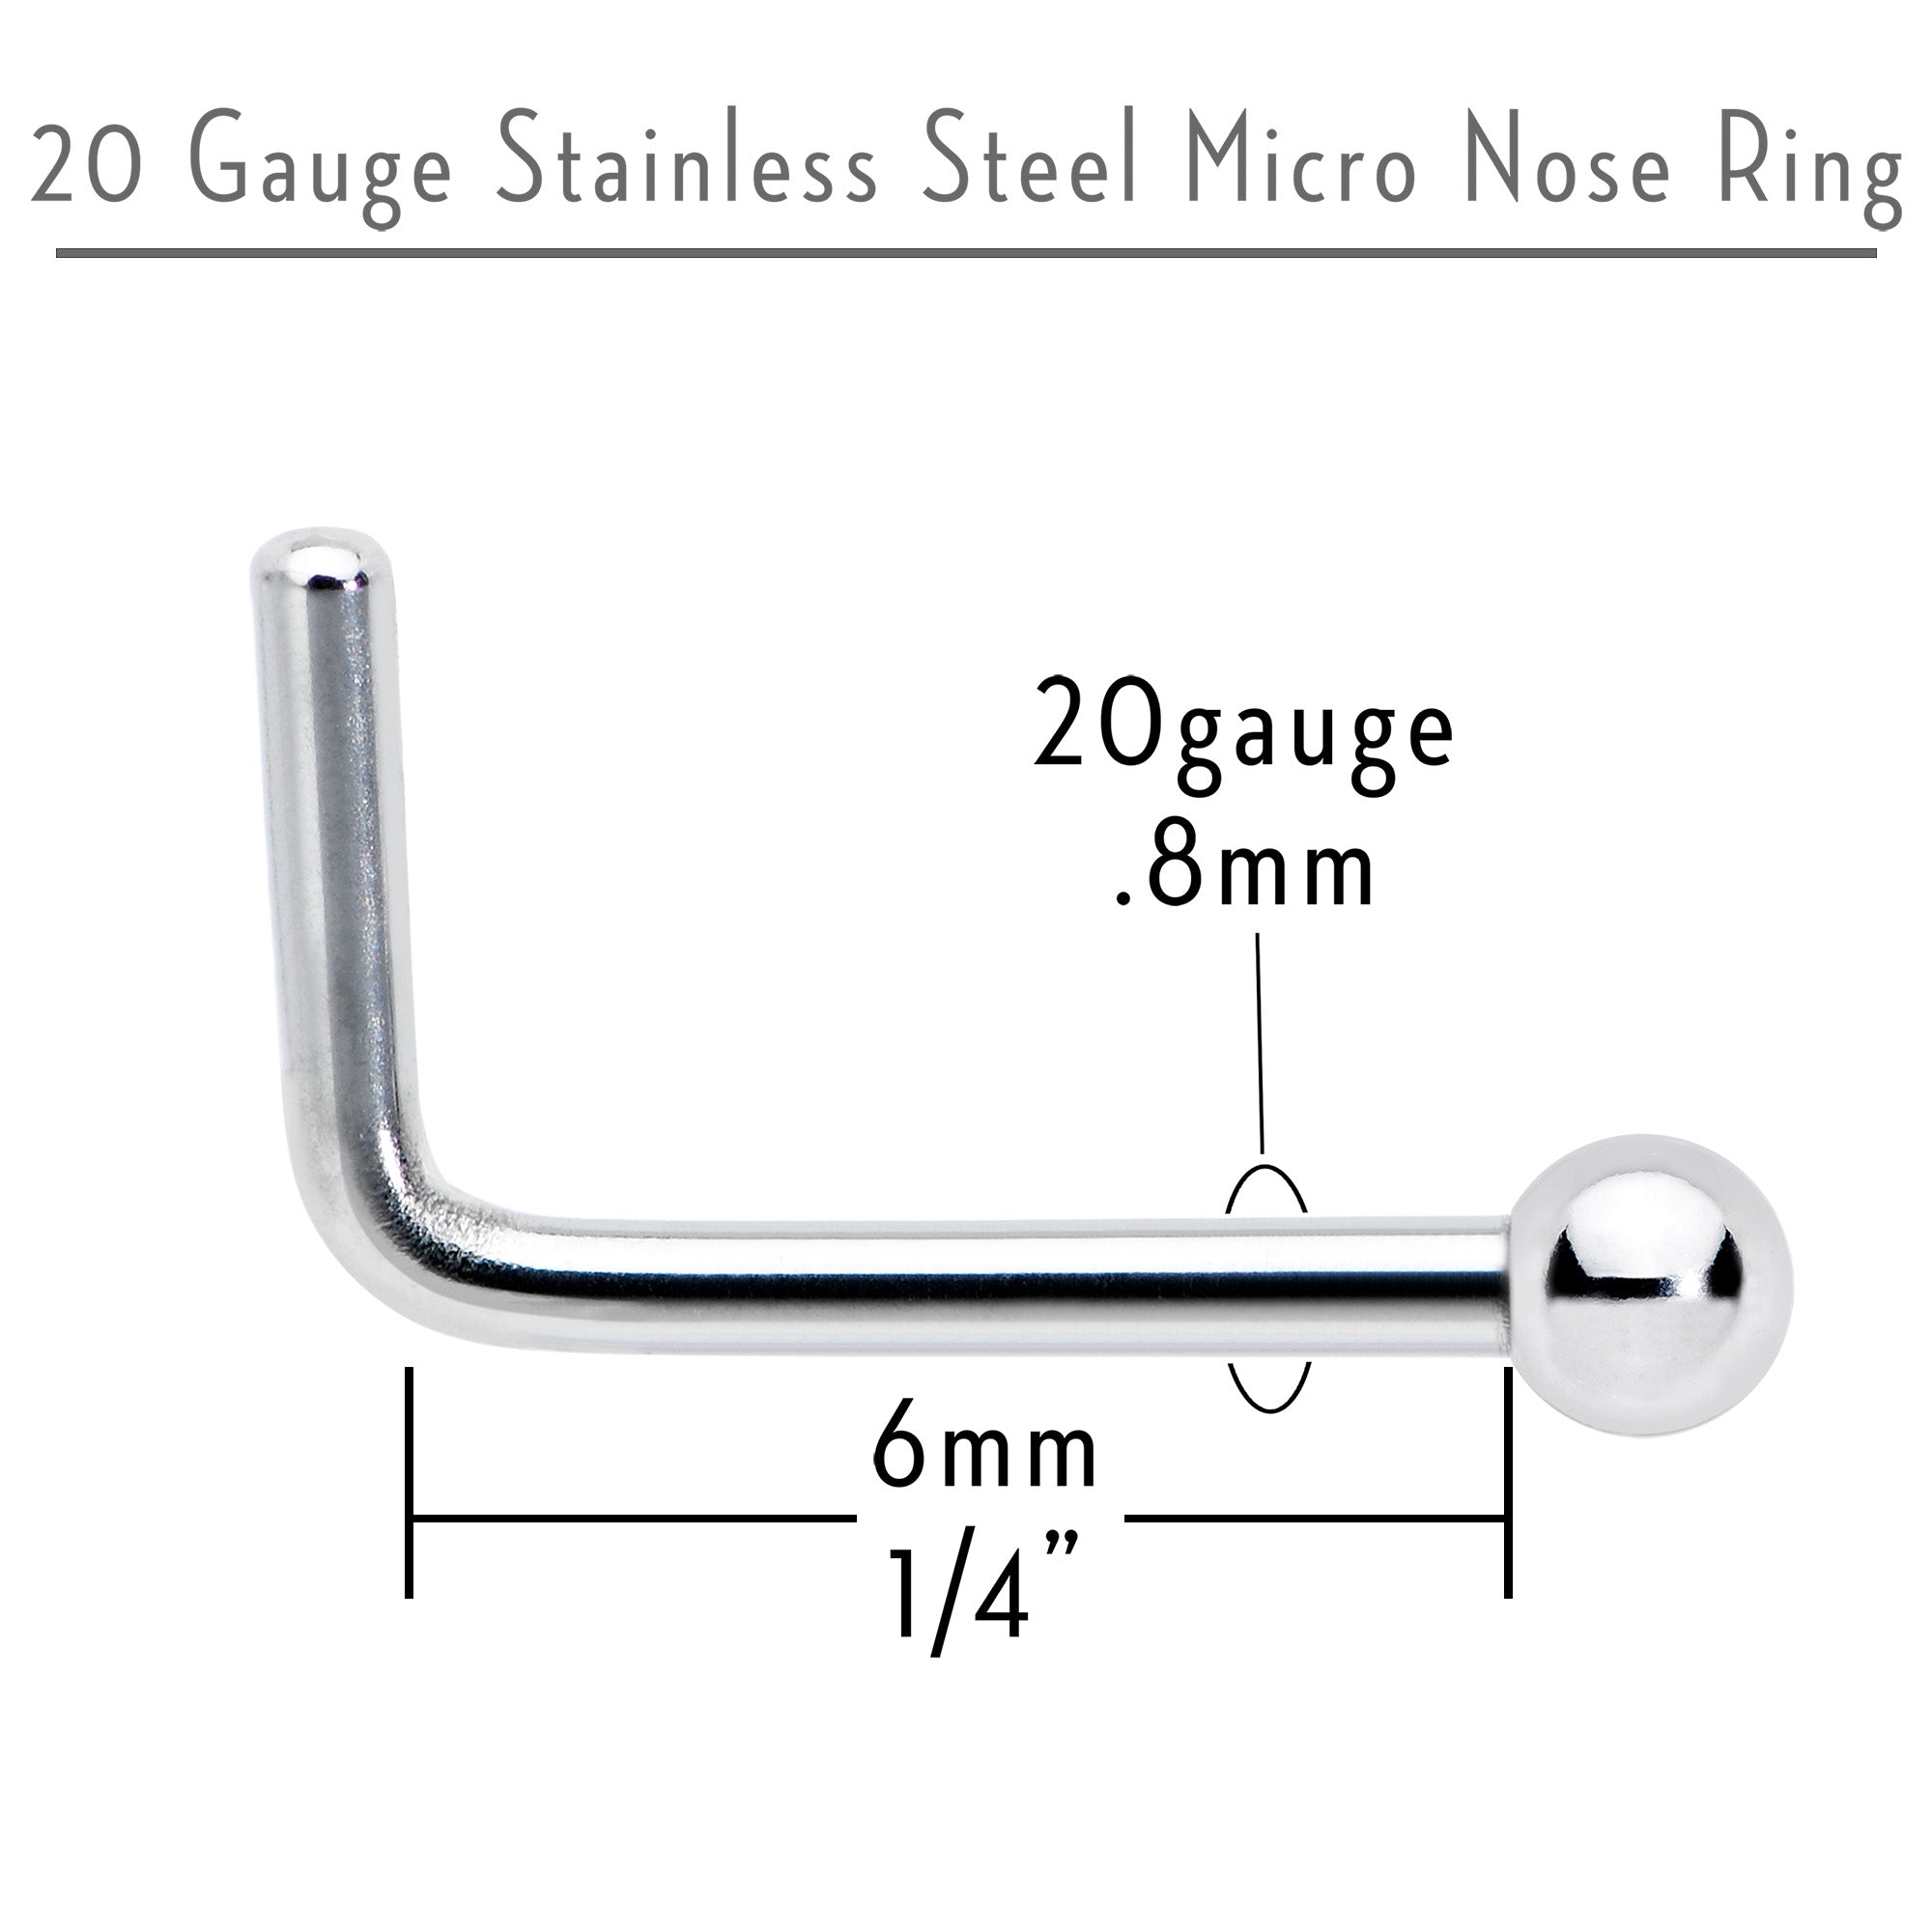 20 Gauge Stainless Steel Stainless Steel Micro Ball Nose Ring L-Shaped